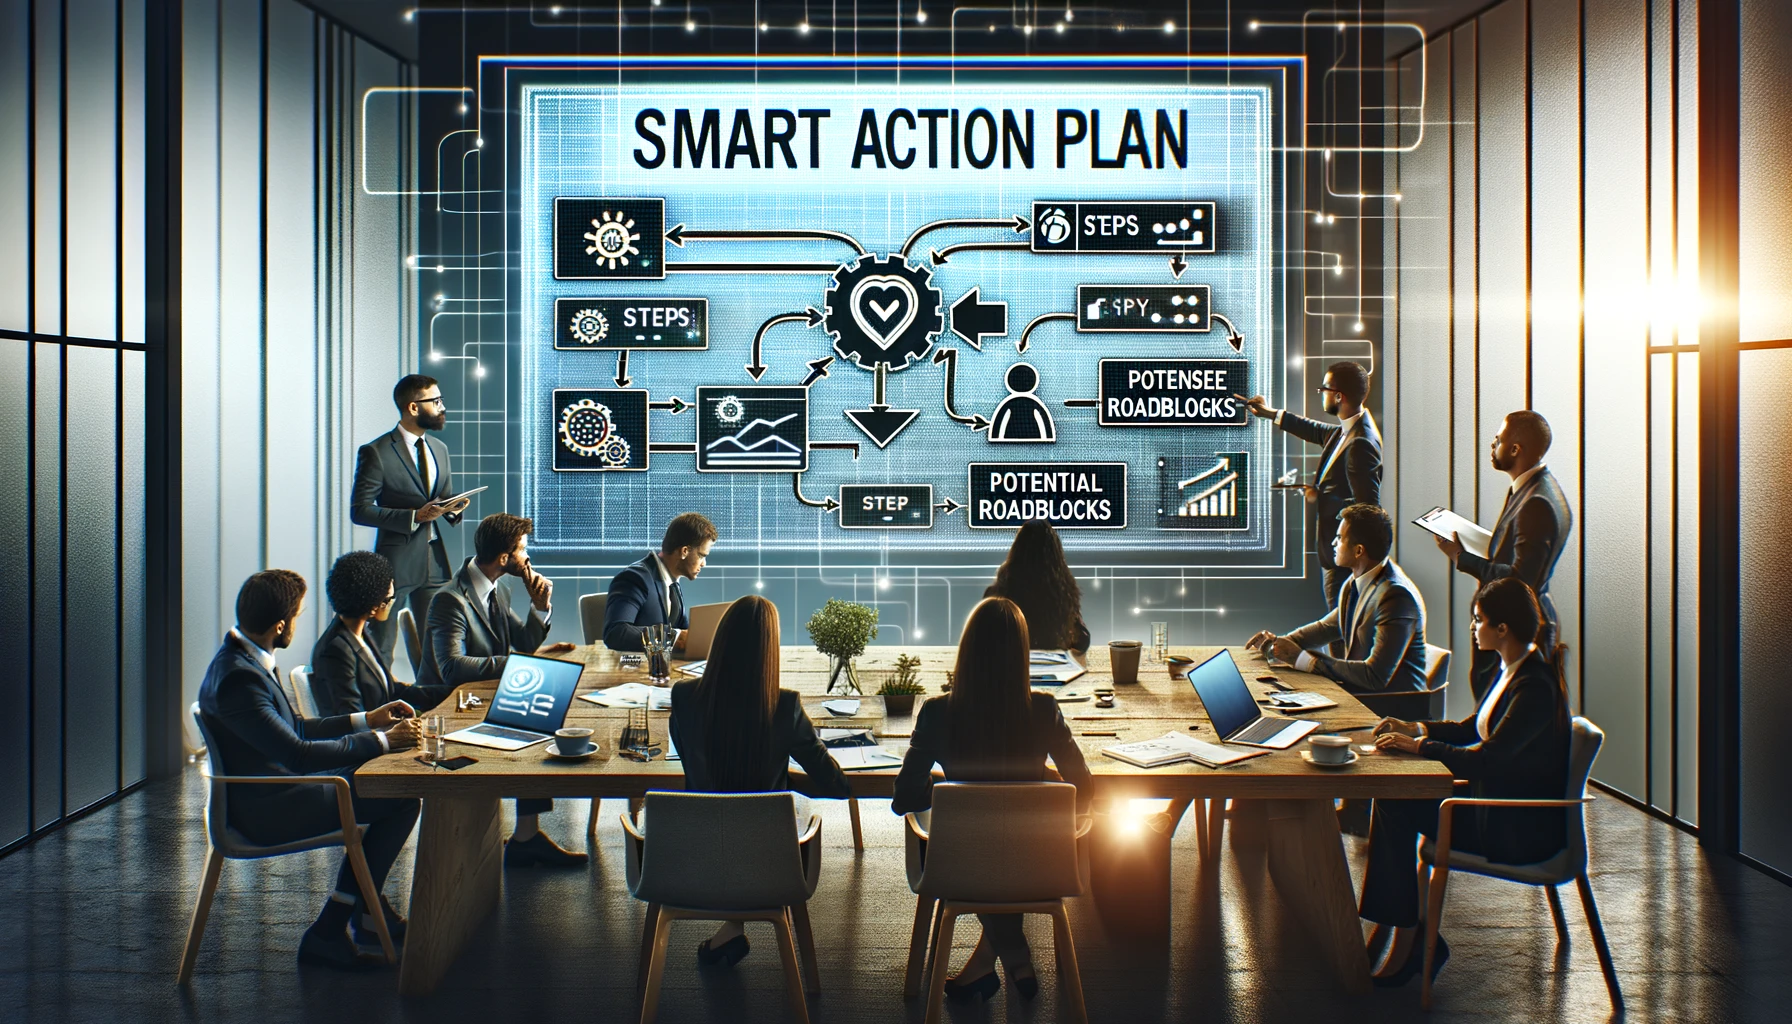 Business professionals in a modern office setting crafting a SMART action plan. A large screen displays an action plan template with steps, resources, and potential roadblocks, while professionals use laptops and whiteboards for discussion.